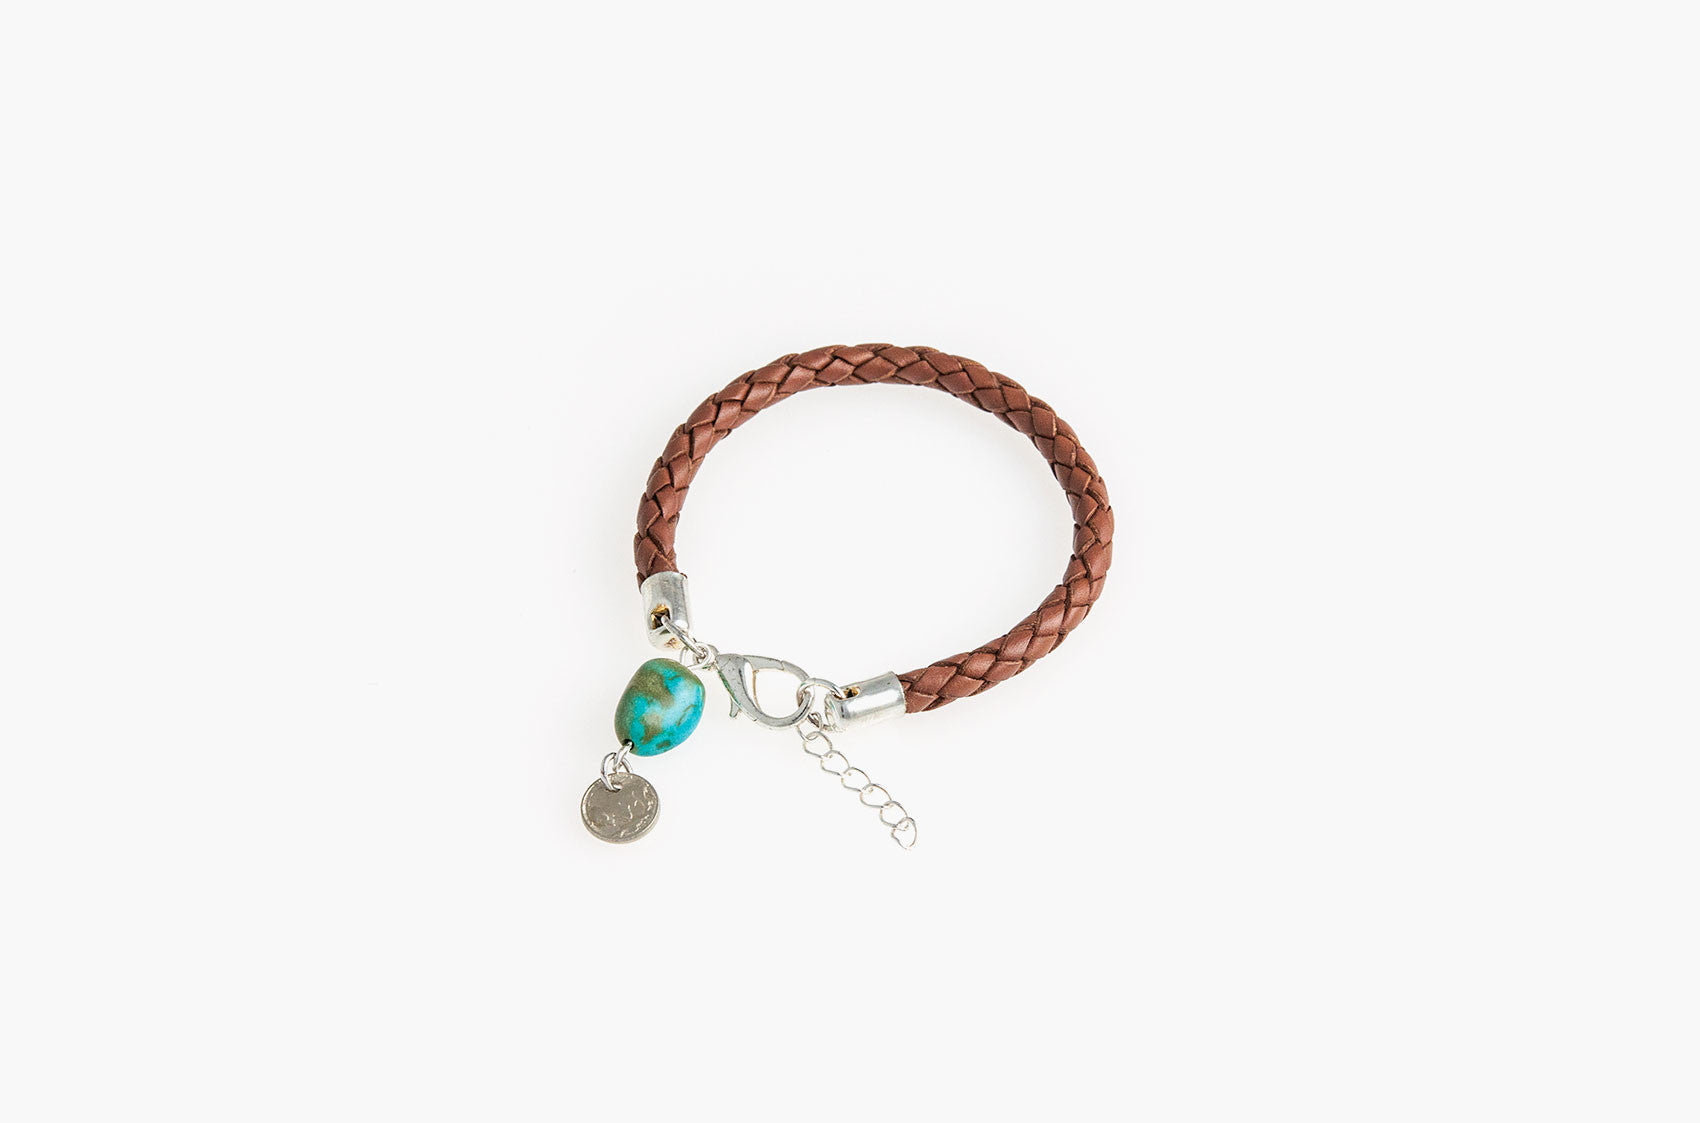 Plaited leather and turquoise bracelet